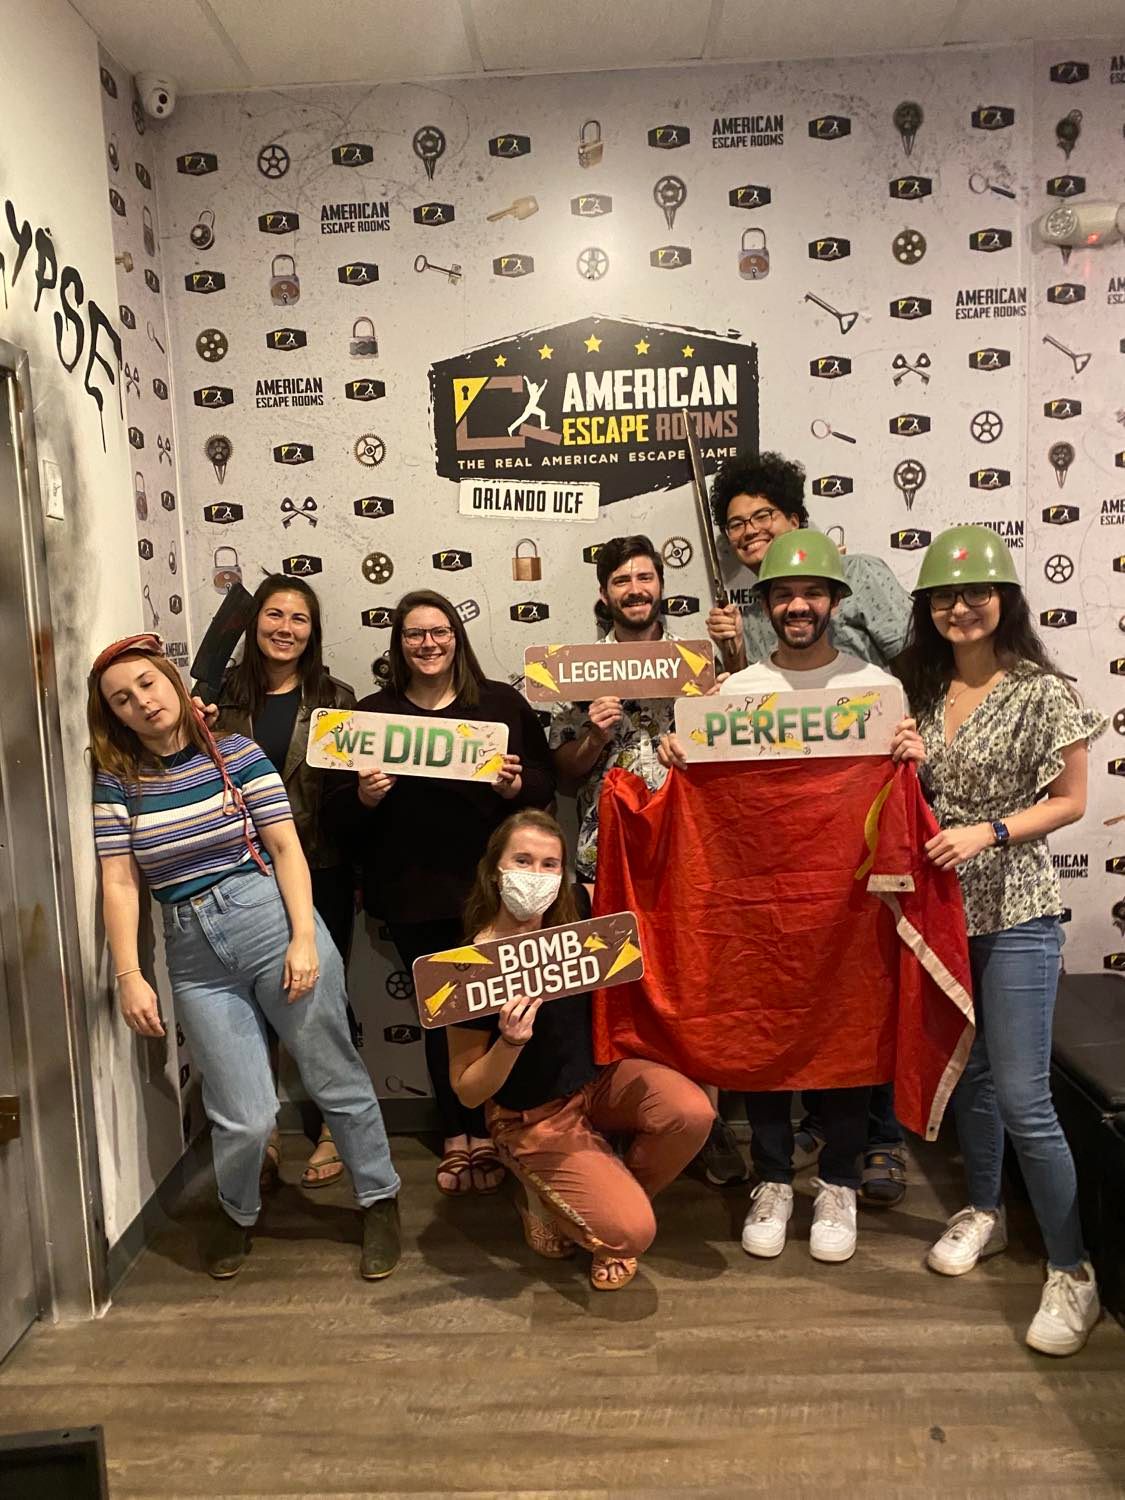 future doctors played the Cold War Crisis - Orlando and finished the game with 7 minutes 17seconds left. Congratulations! Well done!